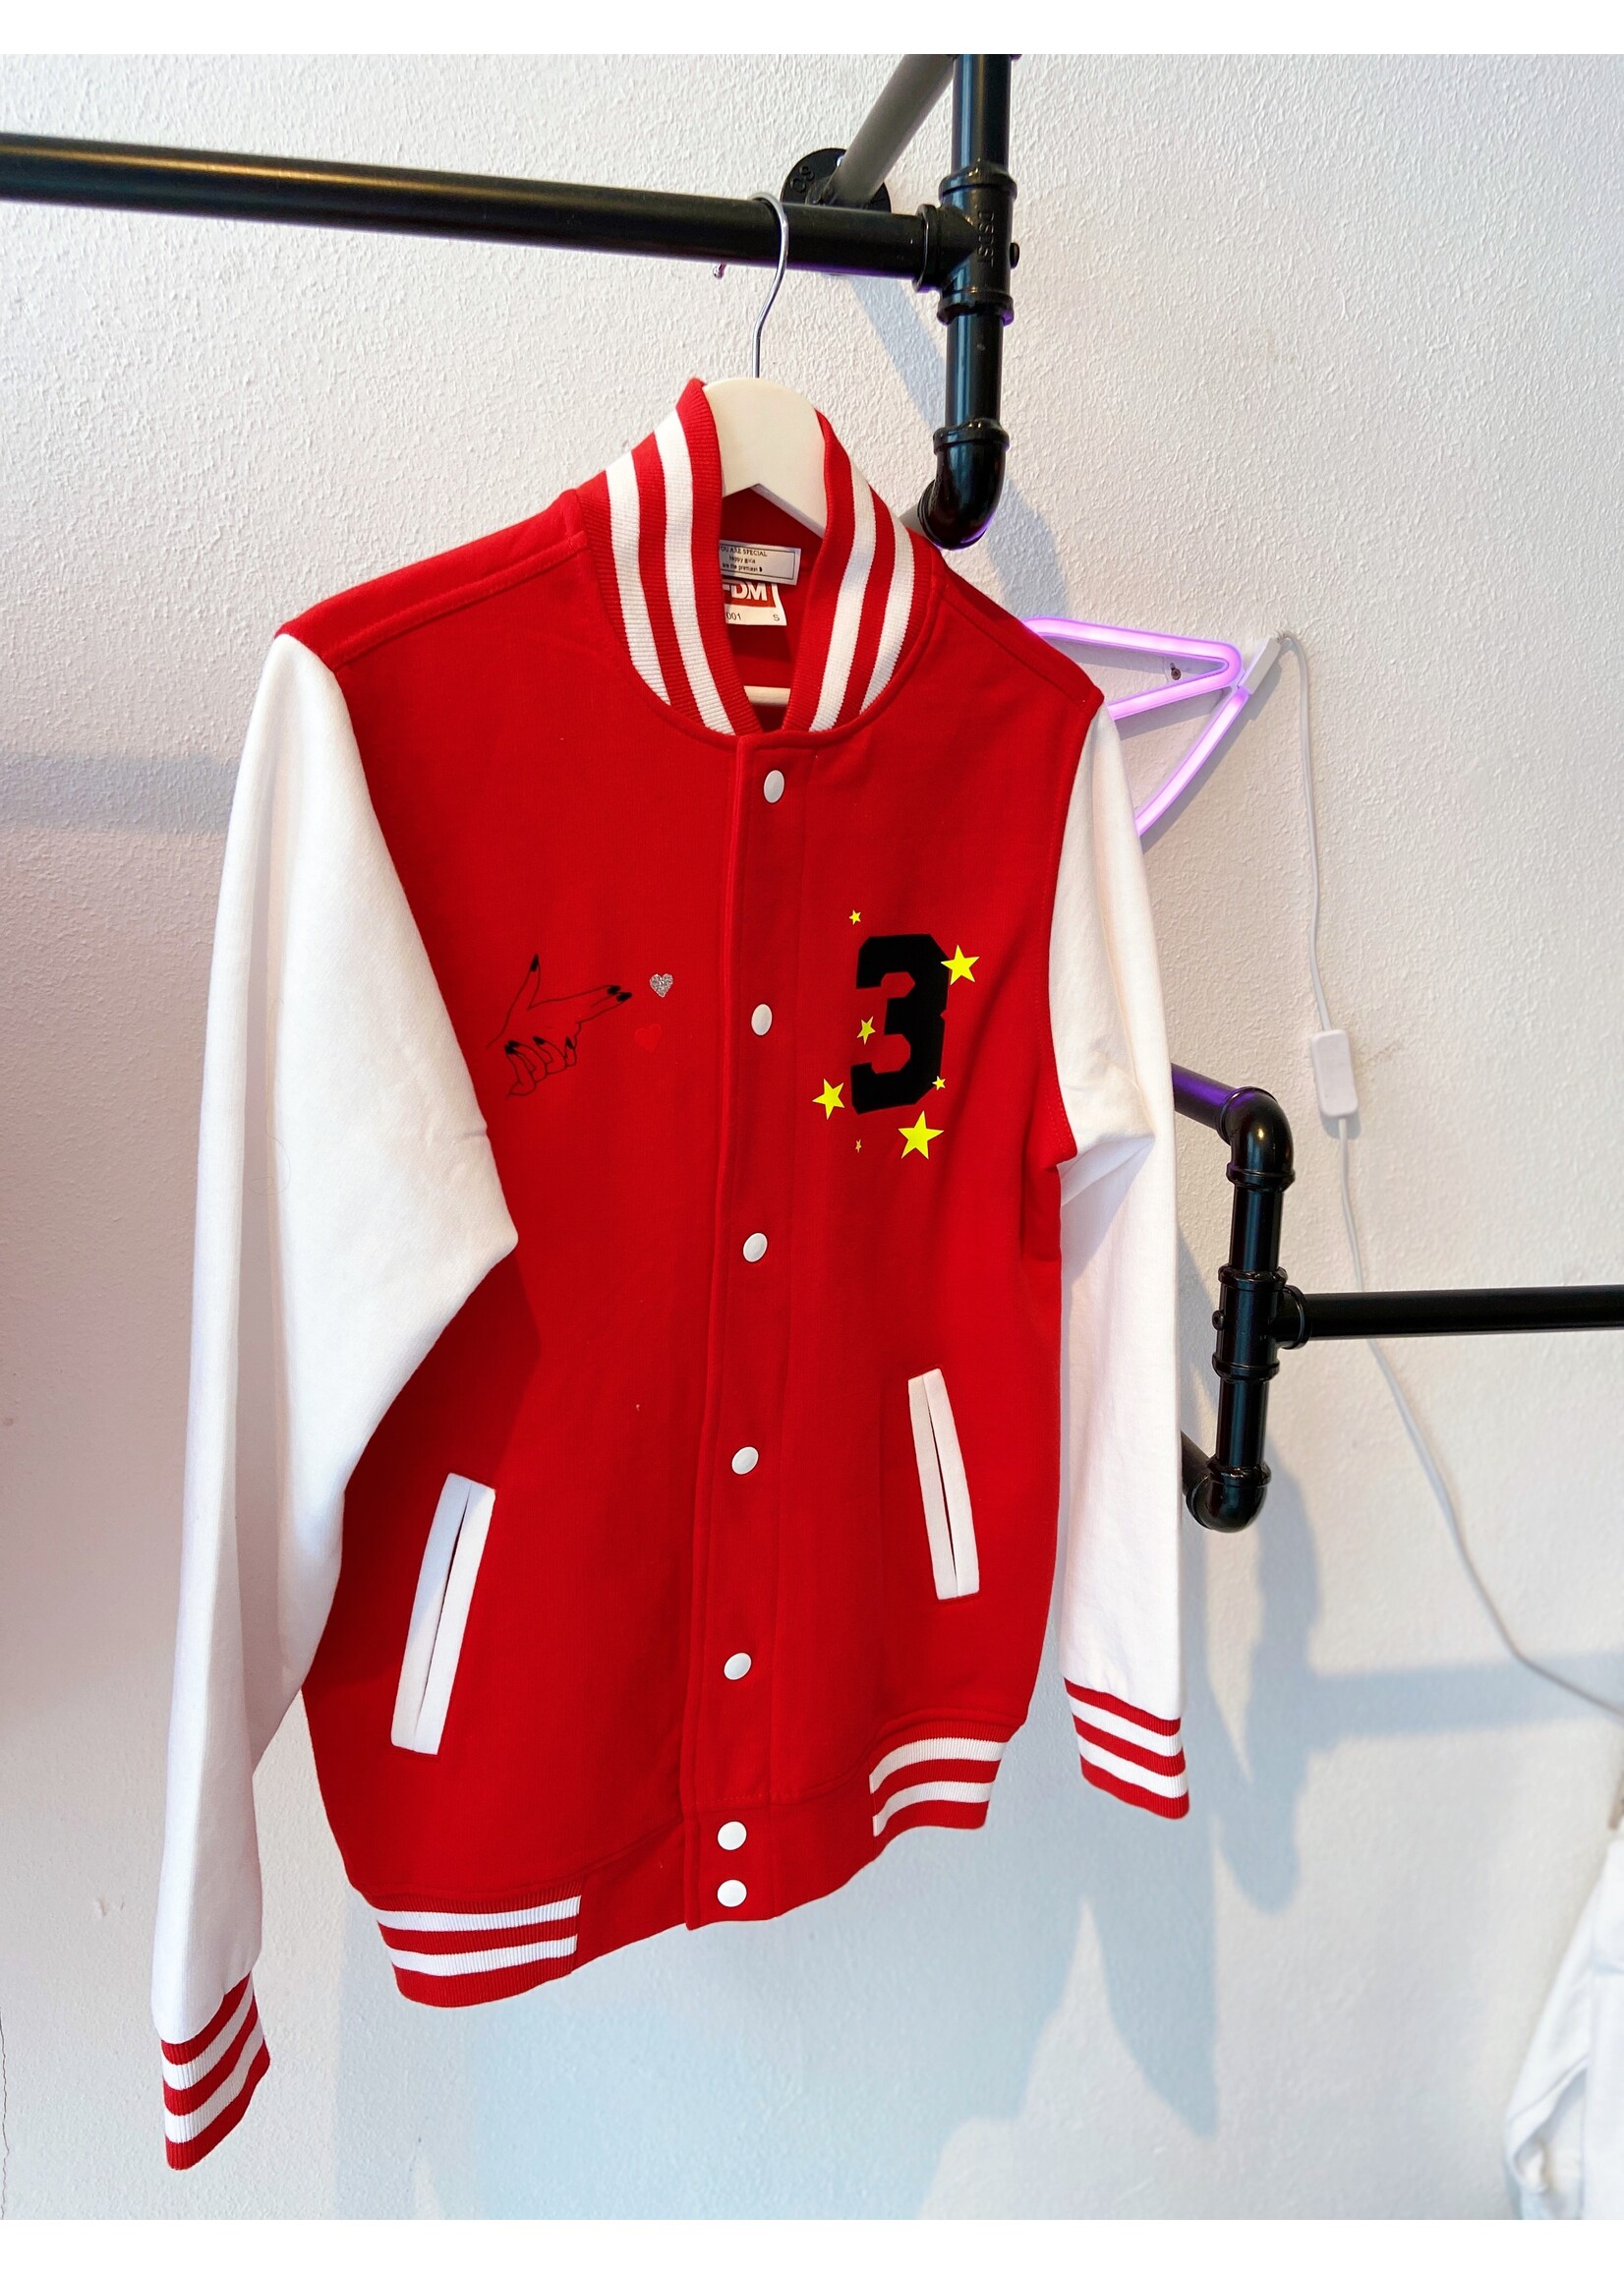 YOU ARE SPECIAL "TIGER STAR" Red Baseball Jacket